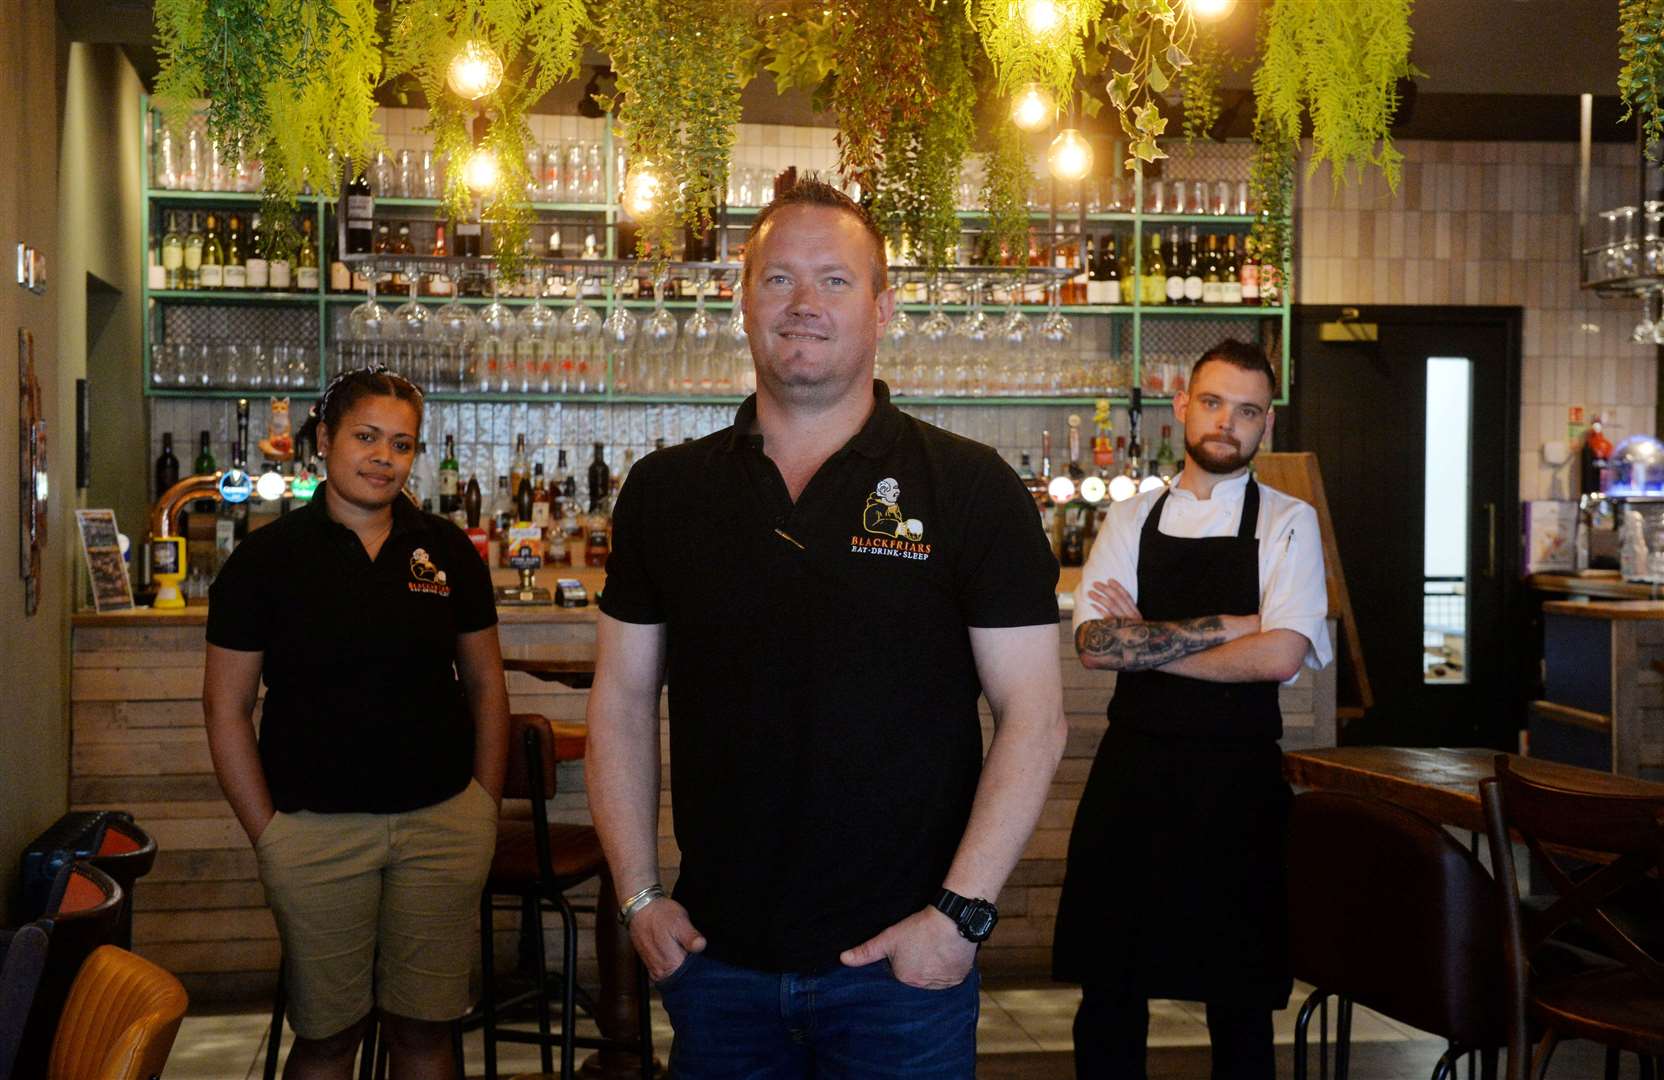 Blackfriars Bar licensee Billy McKechnie with staff members Ruci Taletawa and Ross Guidi.